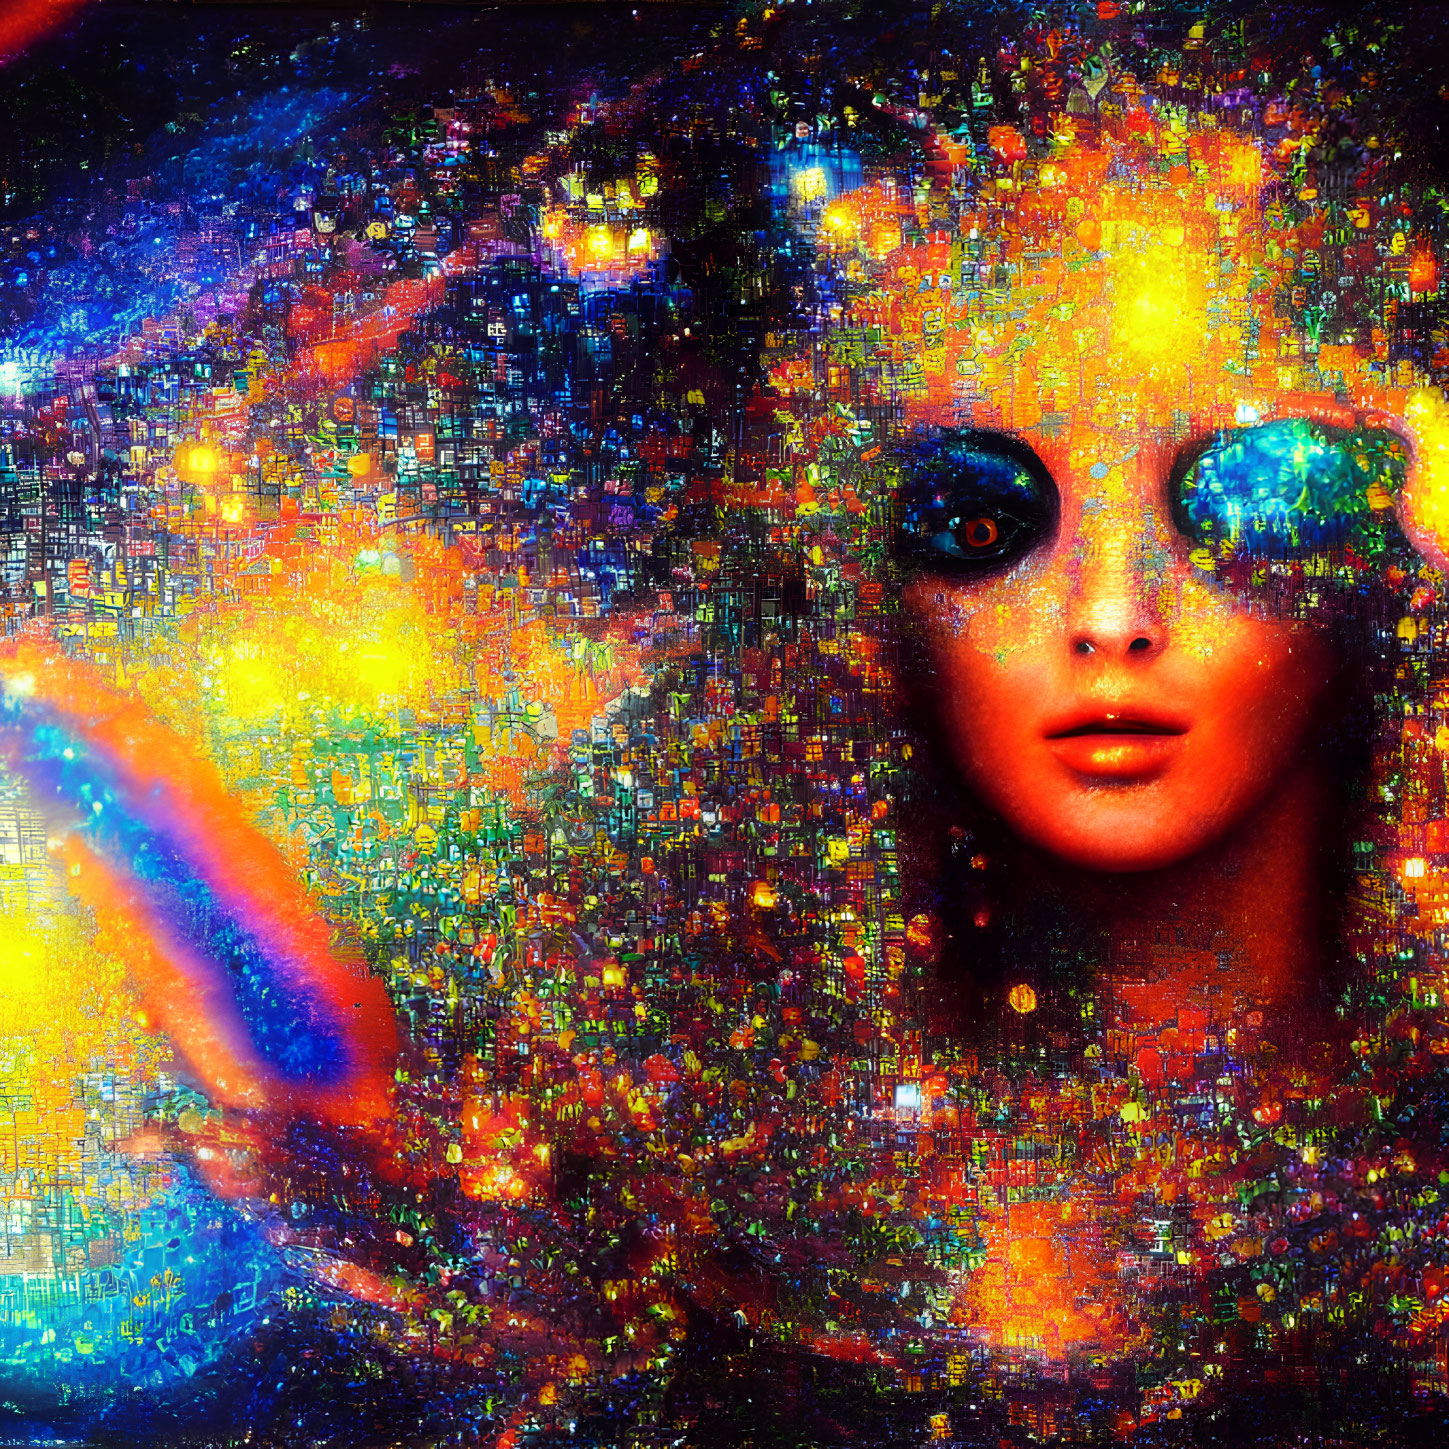 Colorful digital mosaic artwork featuring a woman's face with large blue eyes against a cosmic backdrop